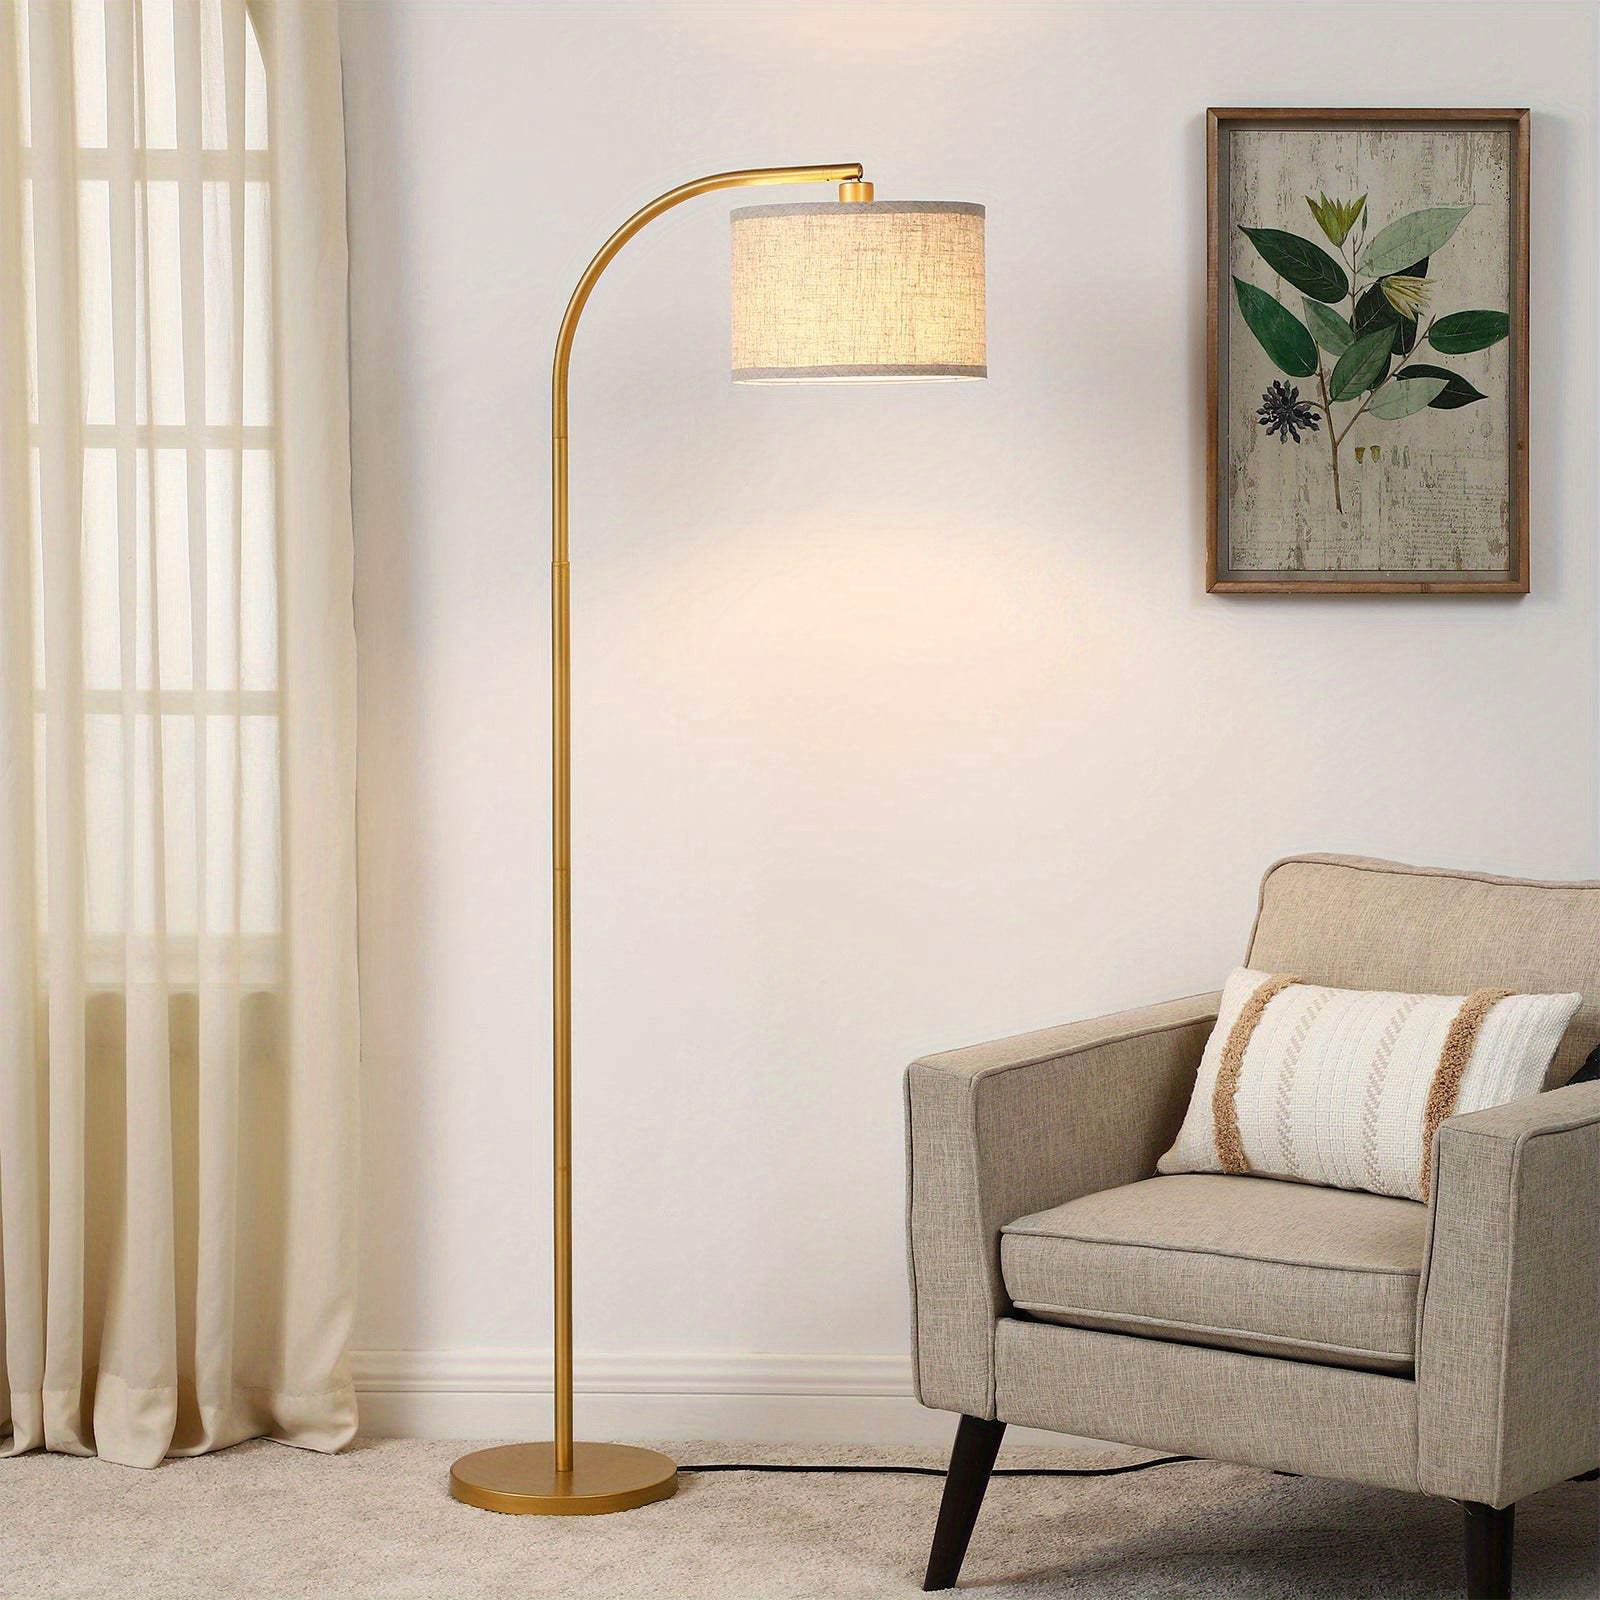 

Dewenwils Modern Gold Arched Floor Lamps With Adjustable Lampshade, Standing Tall Arc Lamp, Corner Reading Light For Living Room, Bedroom, Office, Simple Design Farmhouse Style (gold)